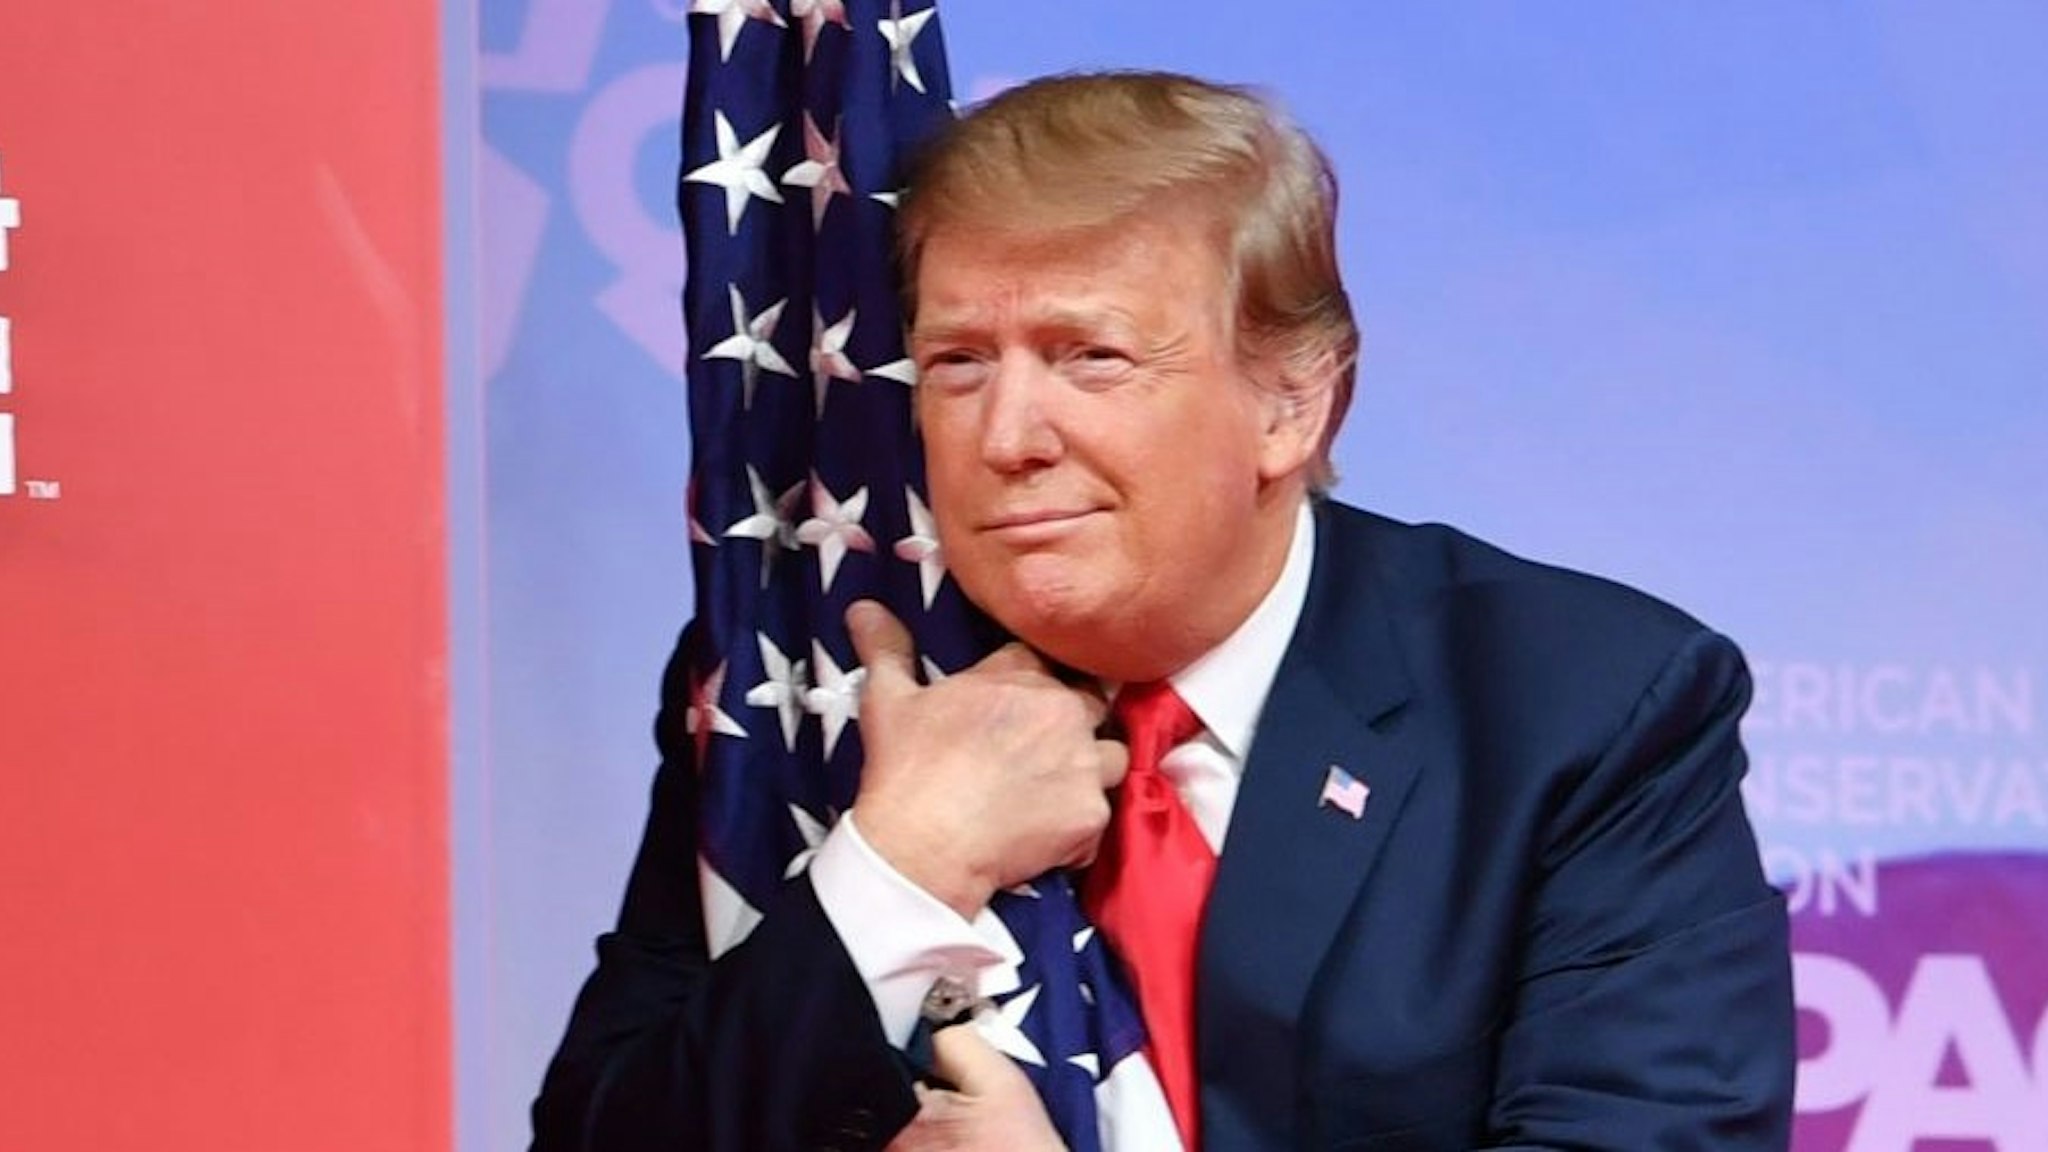 TOPSHOT - US President Donald Trump hugs the US flag as he arrives to speak at the annual Conservative Political Action Conference (CPAC) in National Harbor, Maryland, on March 2, 2019. (Photo by NICHOLAS KAMM / AFP) / ALTERNATIVE CROP (Photo by